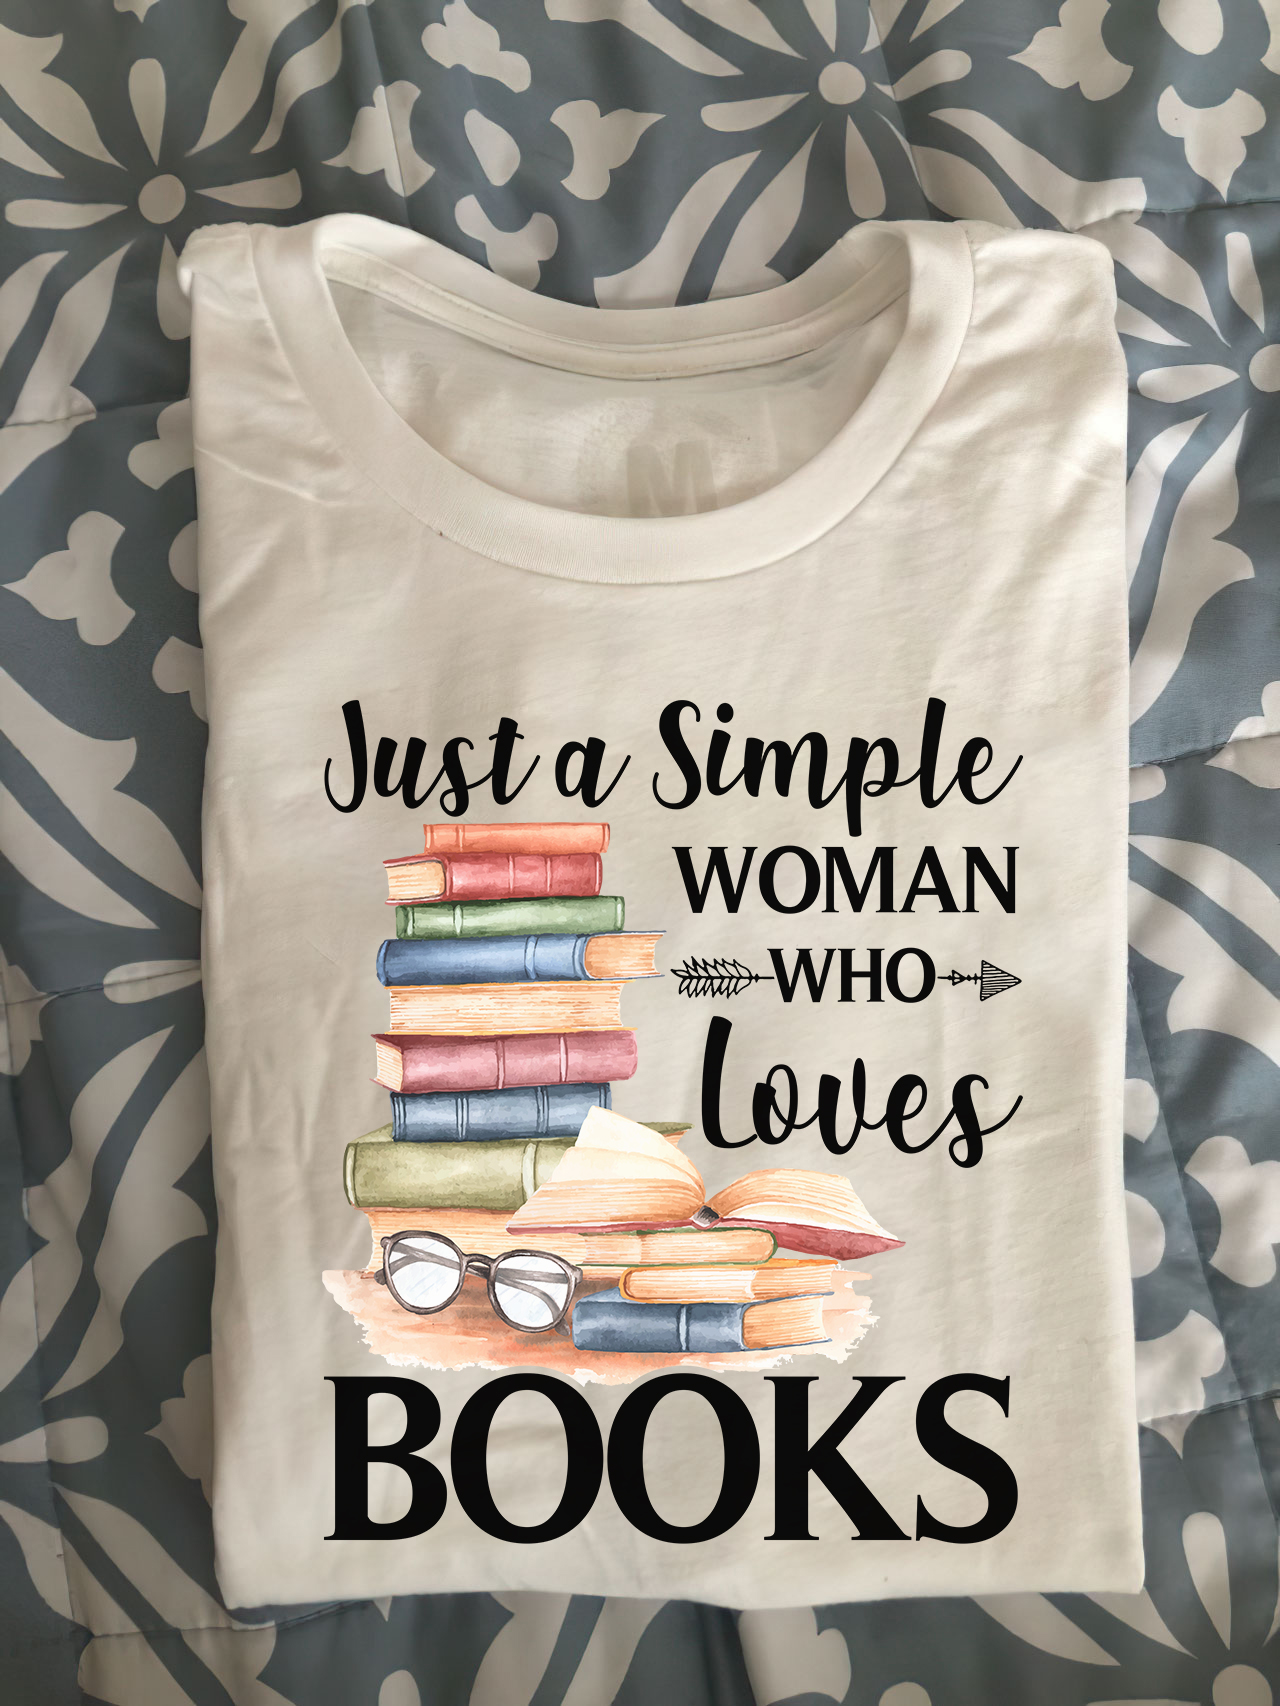 Just a simple woman who loves books